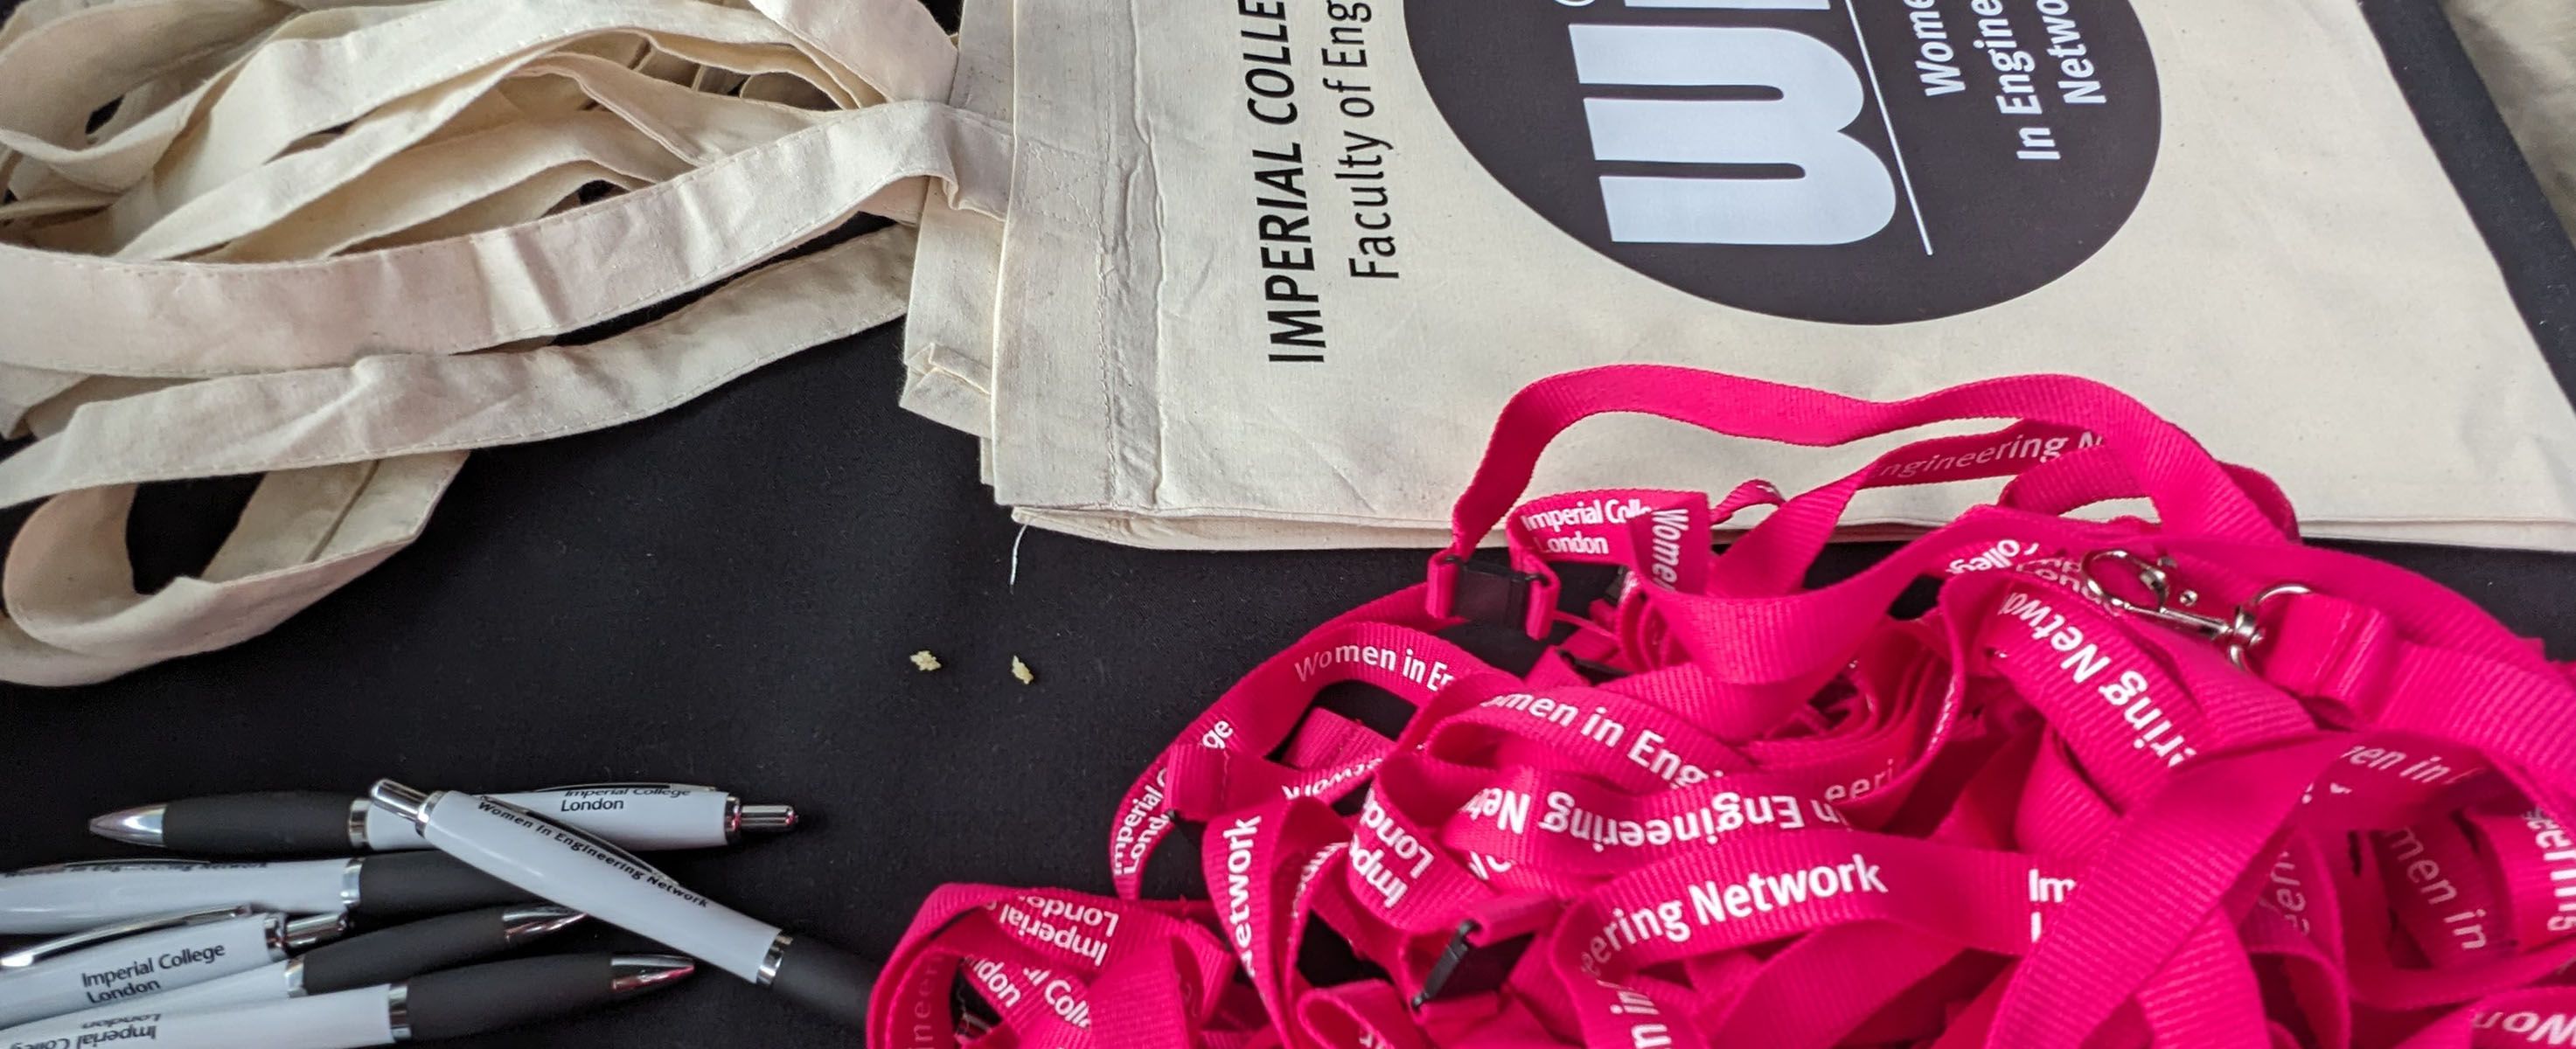 Branded lanyards and tote bags for the Women in Engineering Network